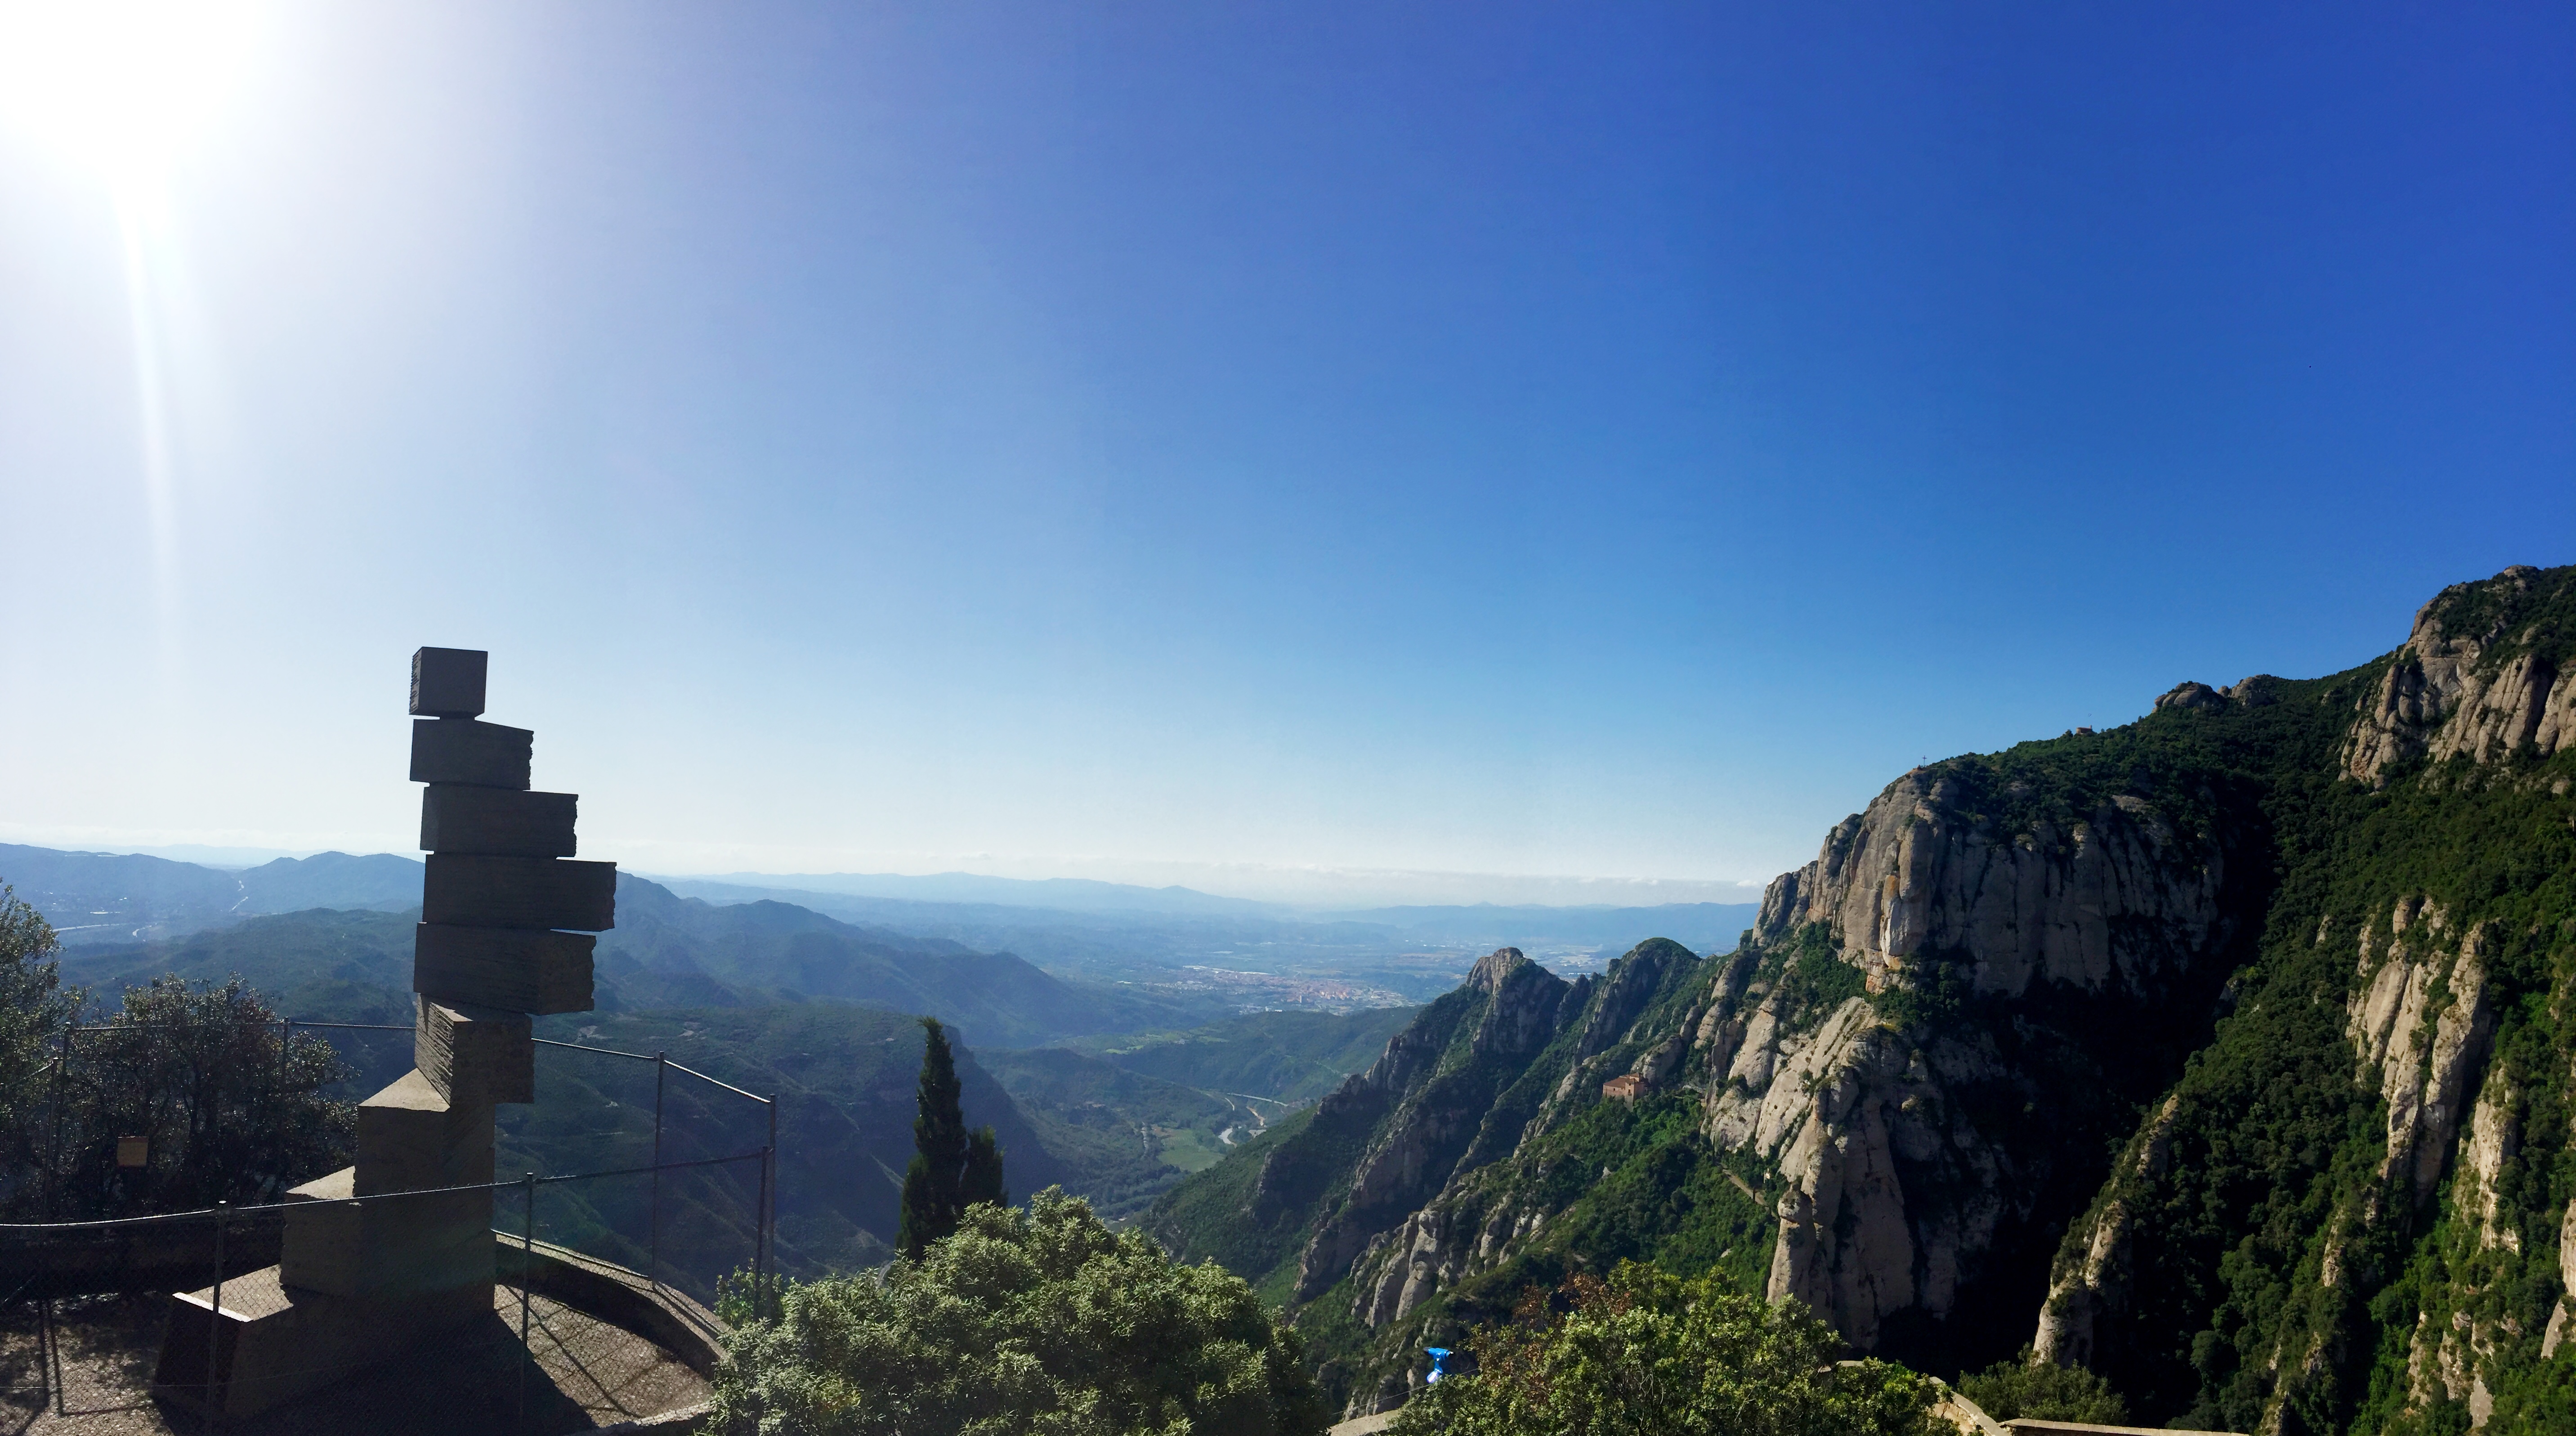 View of the staircase to heaven at Montserrat Abbey